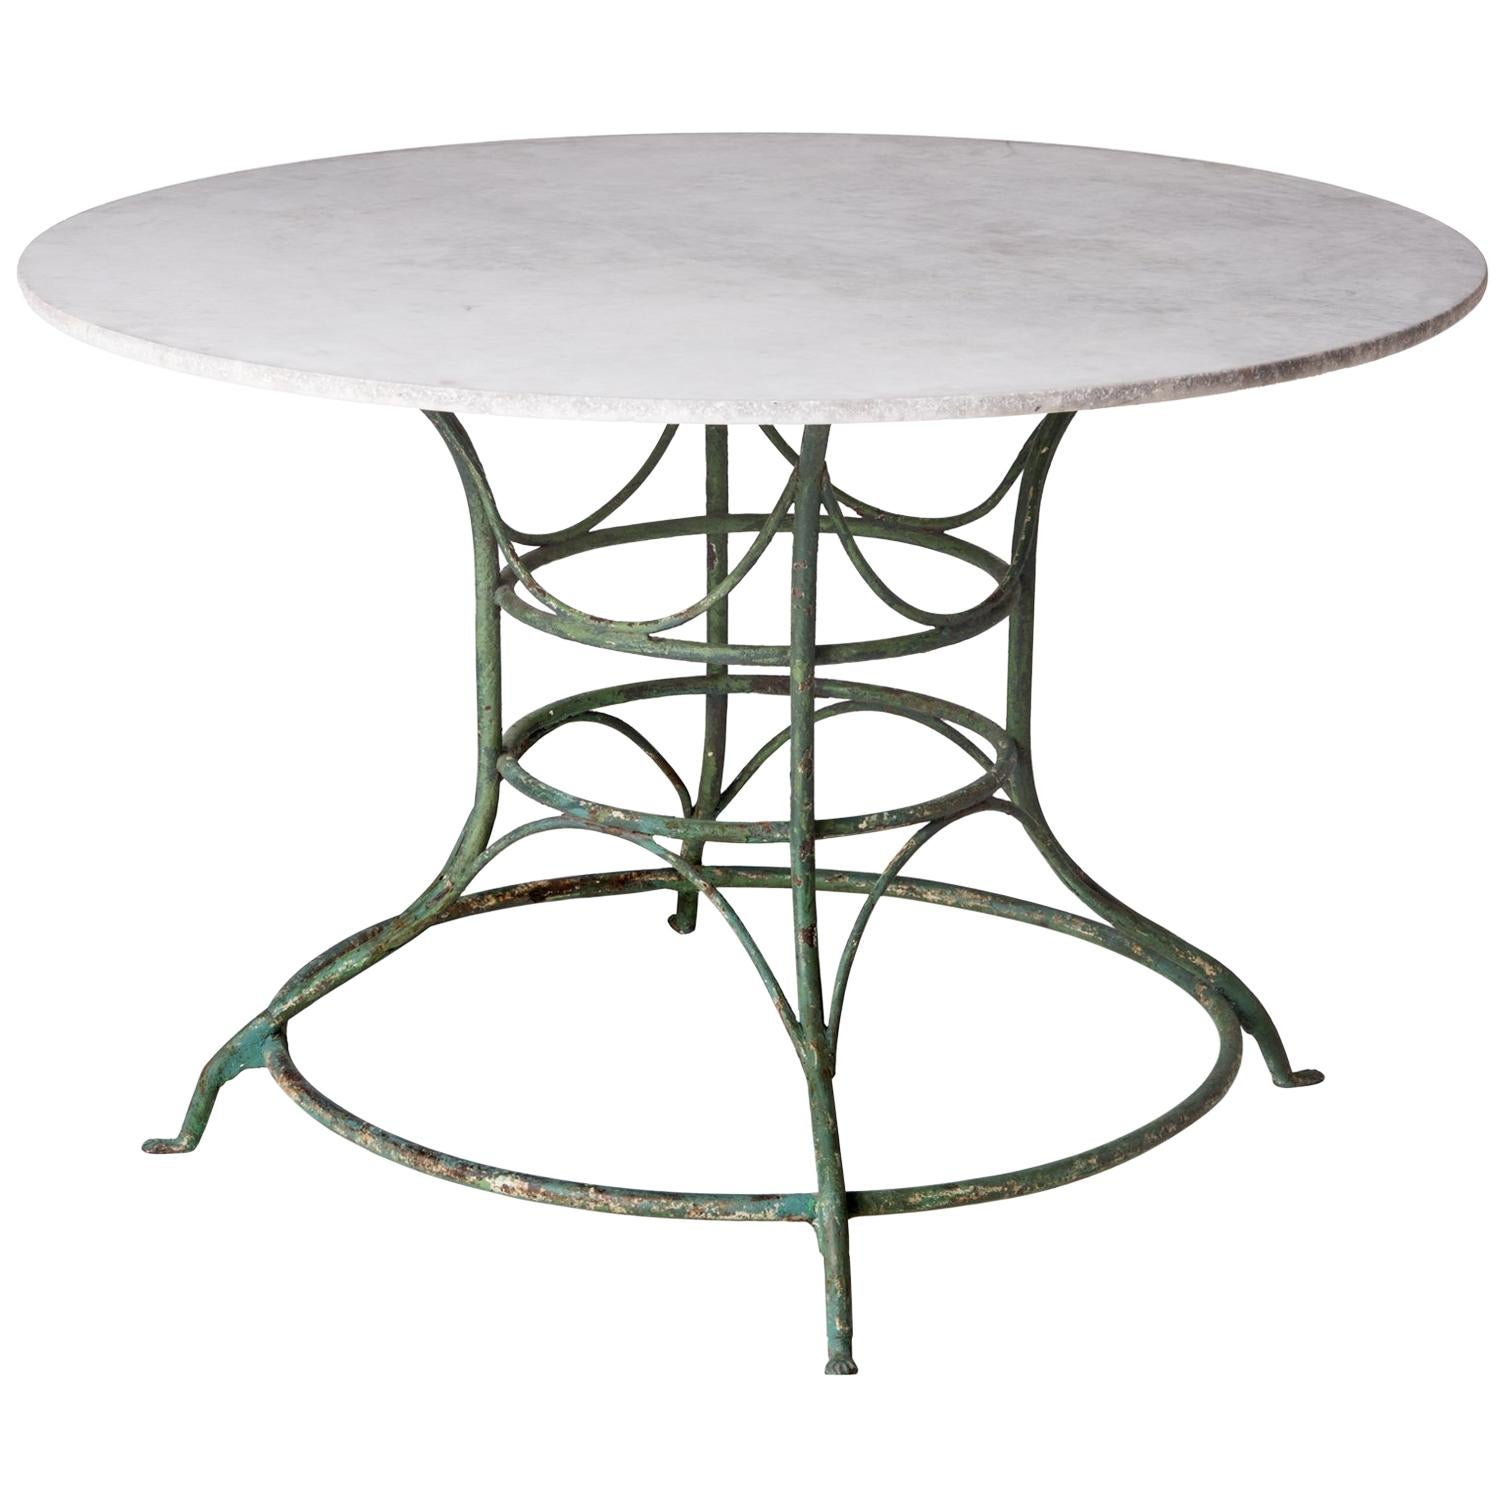 French Wrought Iron Circular Table with White Marble Top, circa 1900